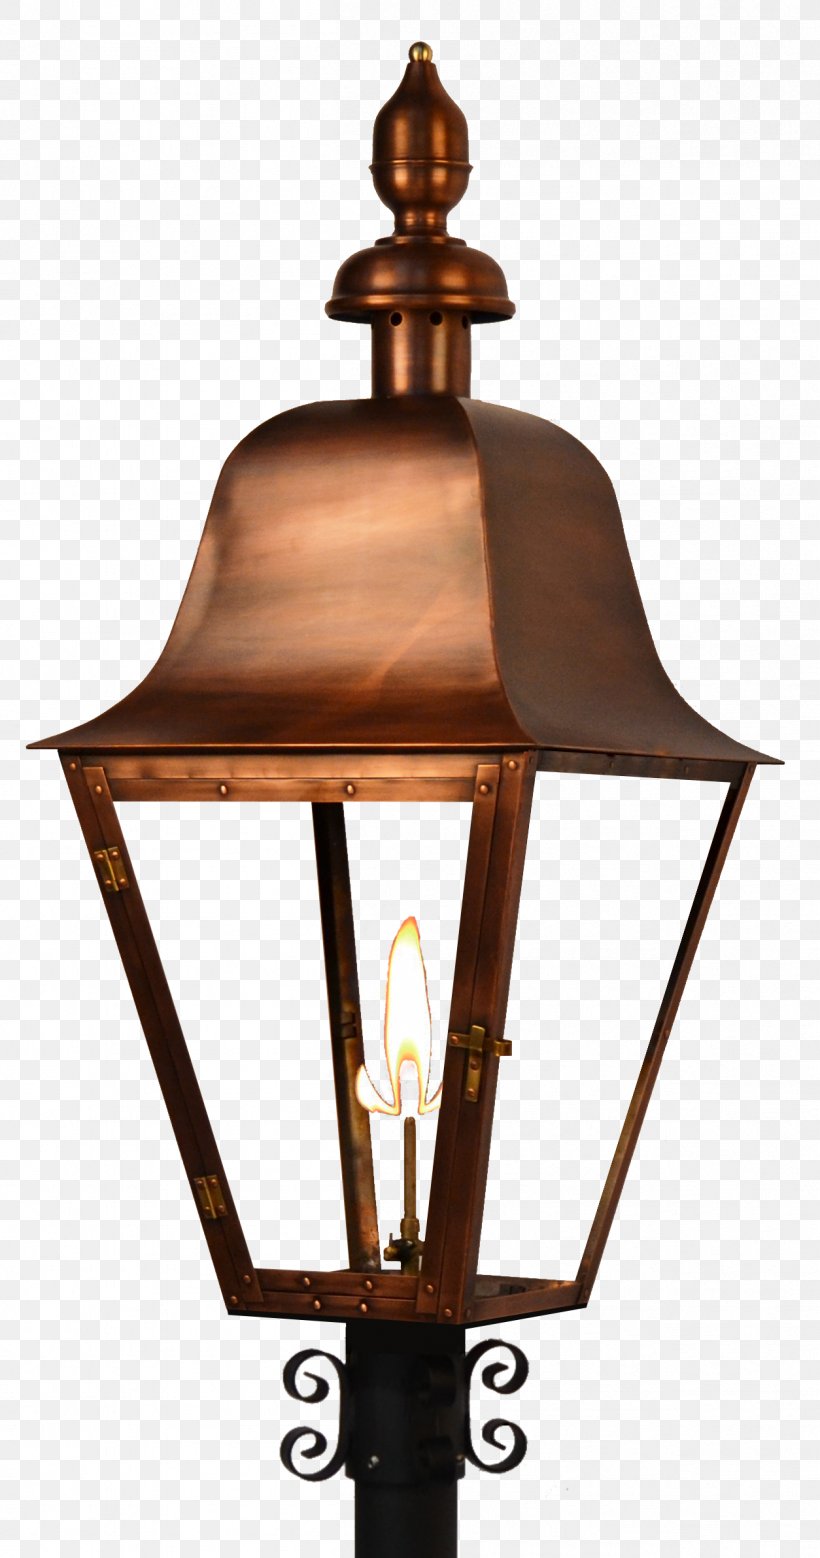 Lantern Gas Lighting Light Fixture, PNG, 1254x2383px, Lantern, Ceiling Fixture, Copper, Coppersmith, Electric Light Download Free